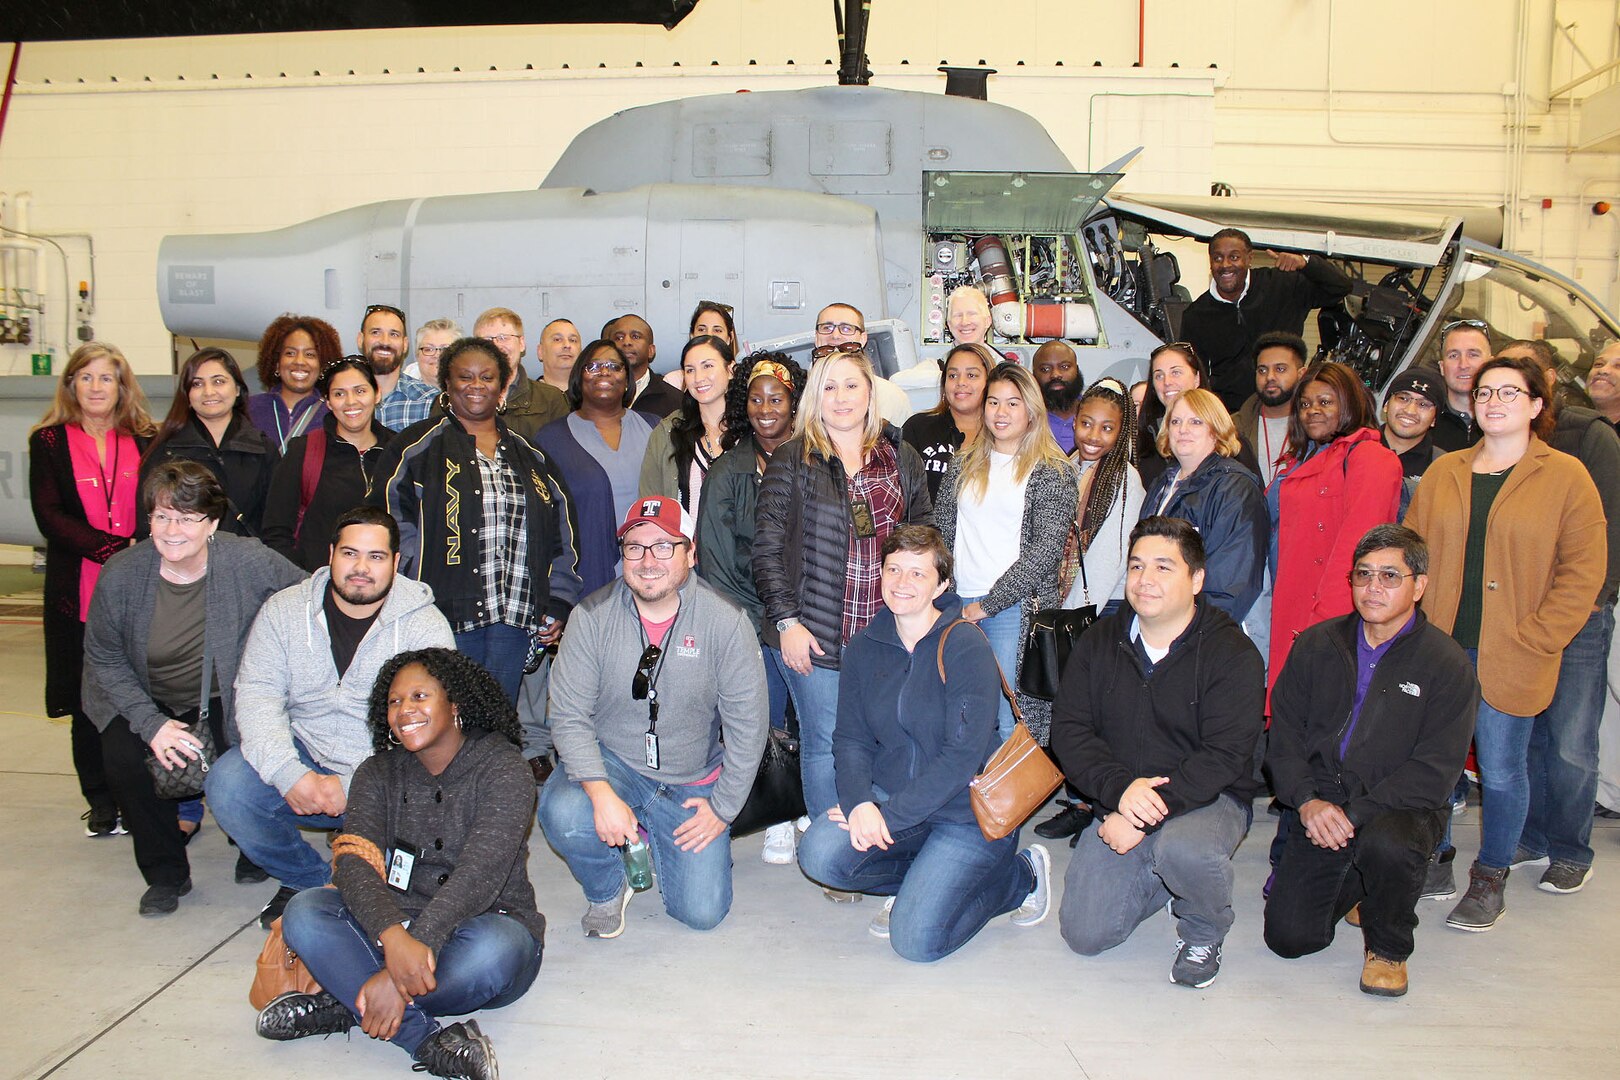 One of the stops during the visit to the Joint Base McGuire-Dix-Lakehurst in New Jersey was a chance to examine Marine helicopters up close. The trip was part of the three-day Defense Logistics Agency Troop Support Academy, held Oct. 22-24. (Photo by Nancy Benecki)